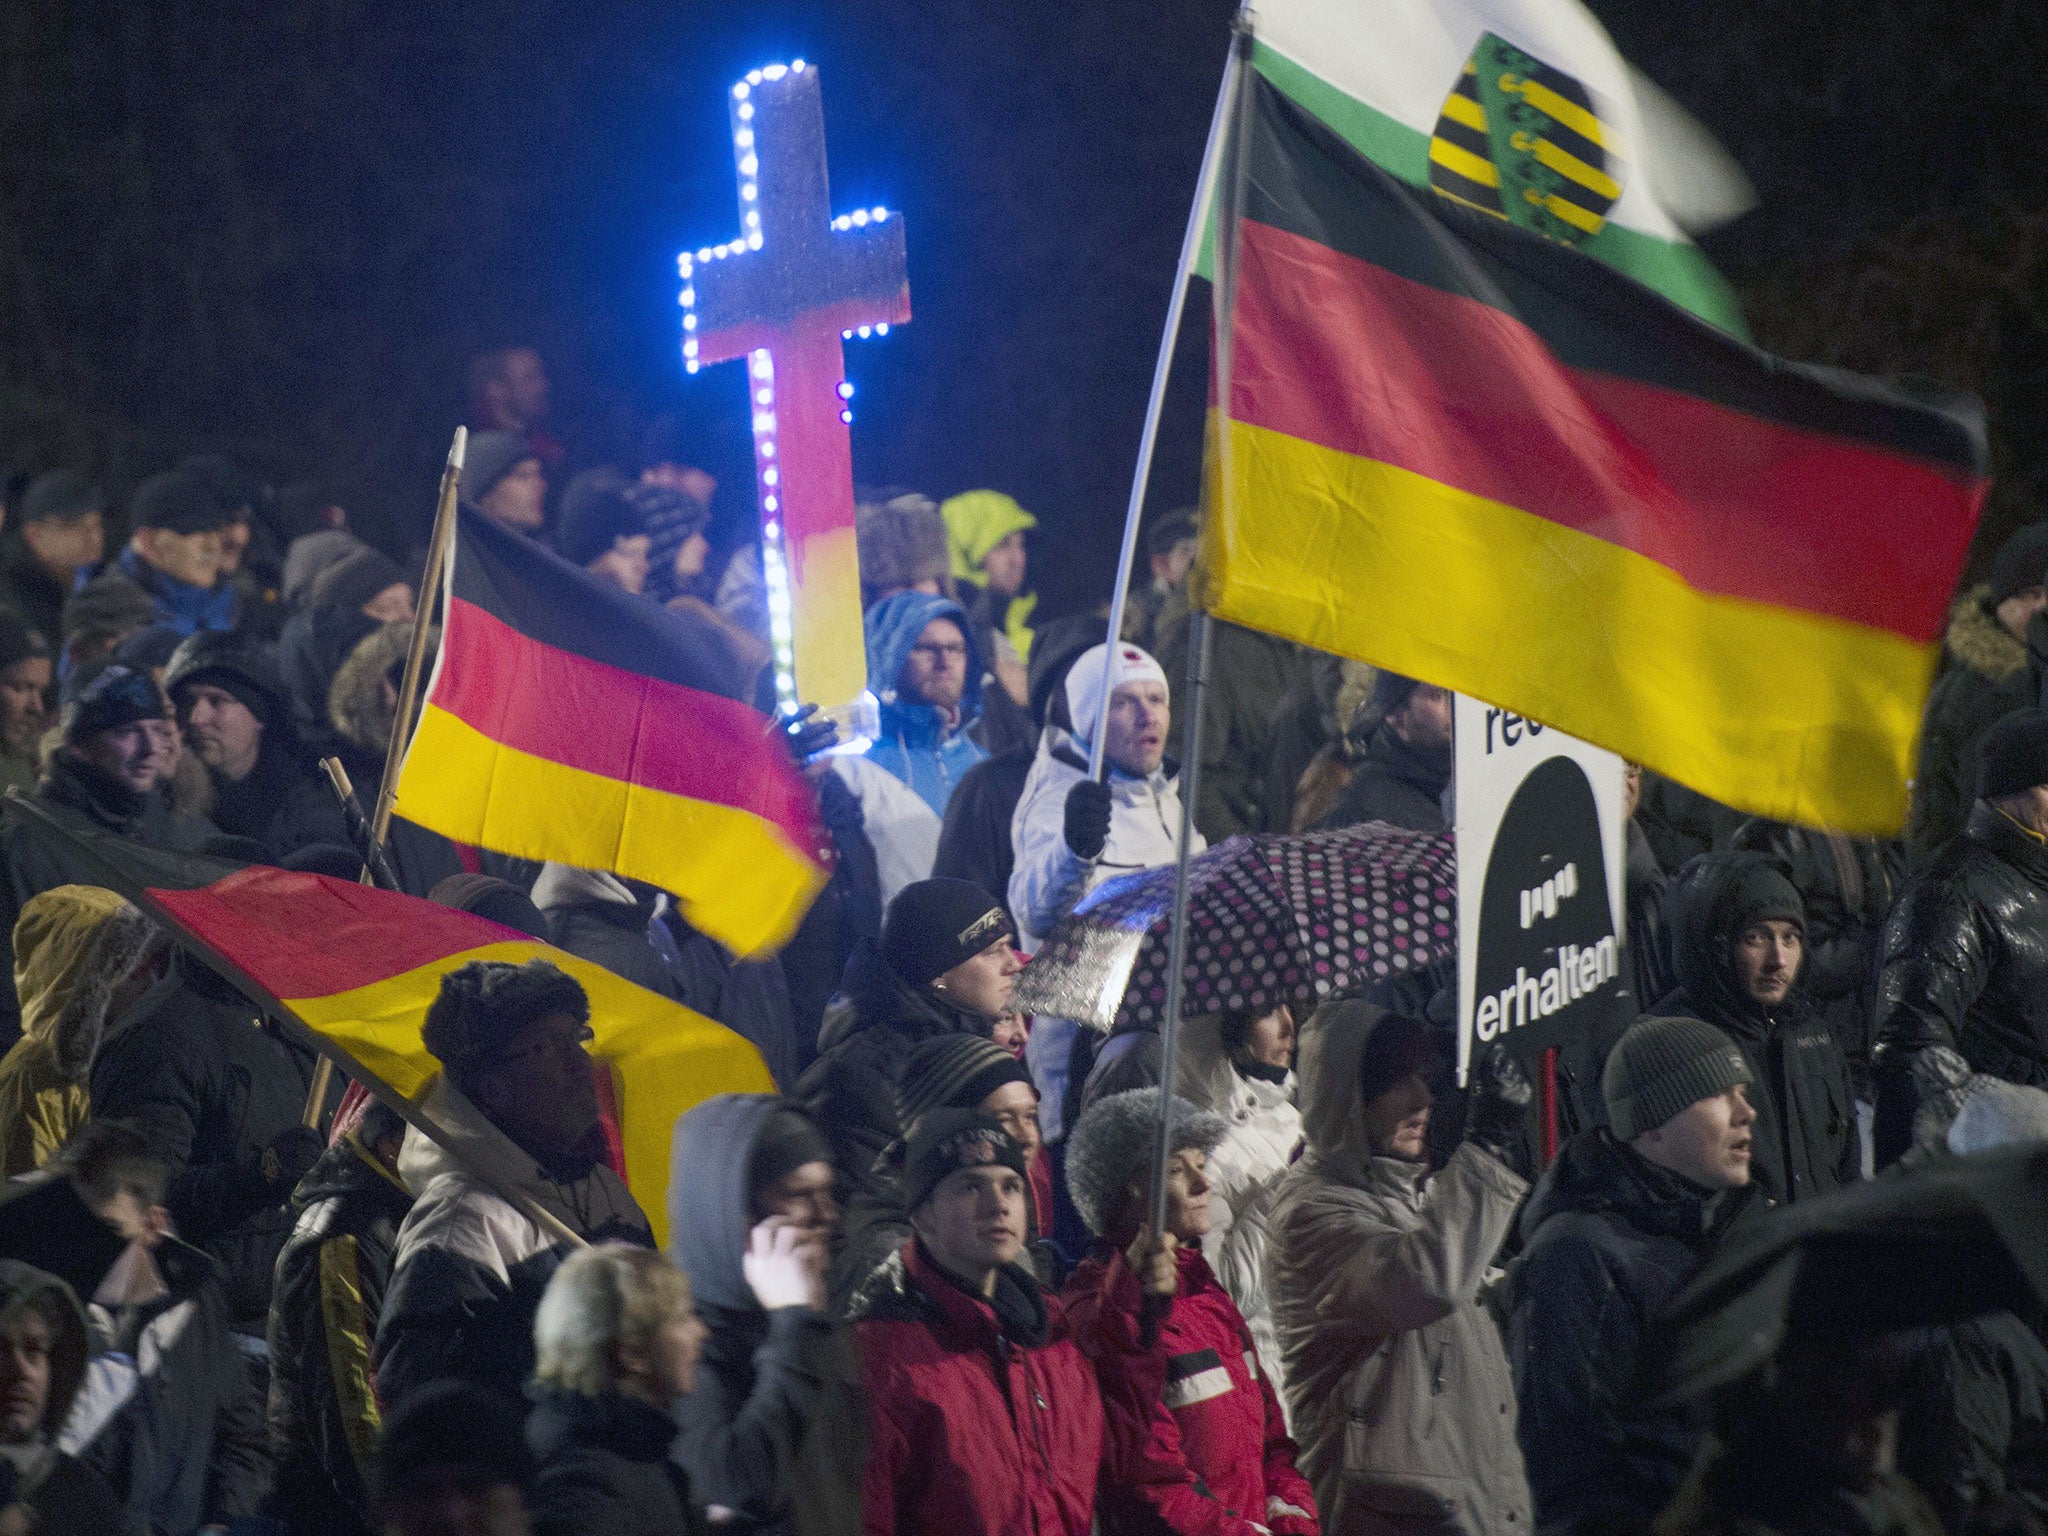 A demonstrator holds a crucifix (C) in the colors of Germany during a rally by a mounting right-wing populist movement called Pegida in Dresden